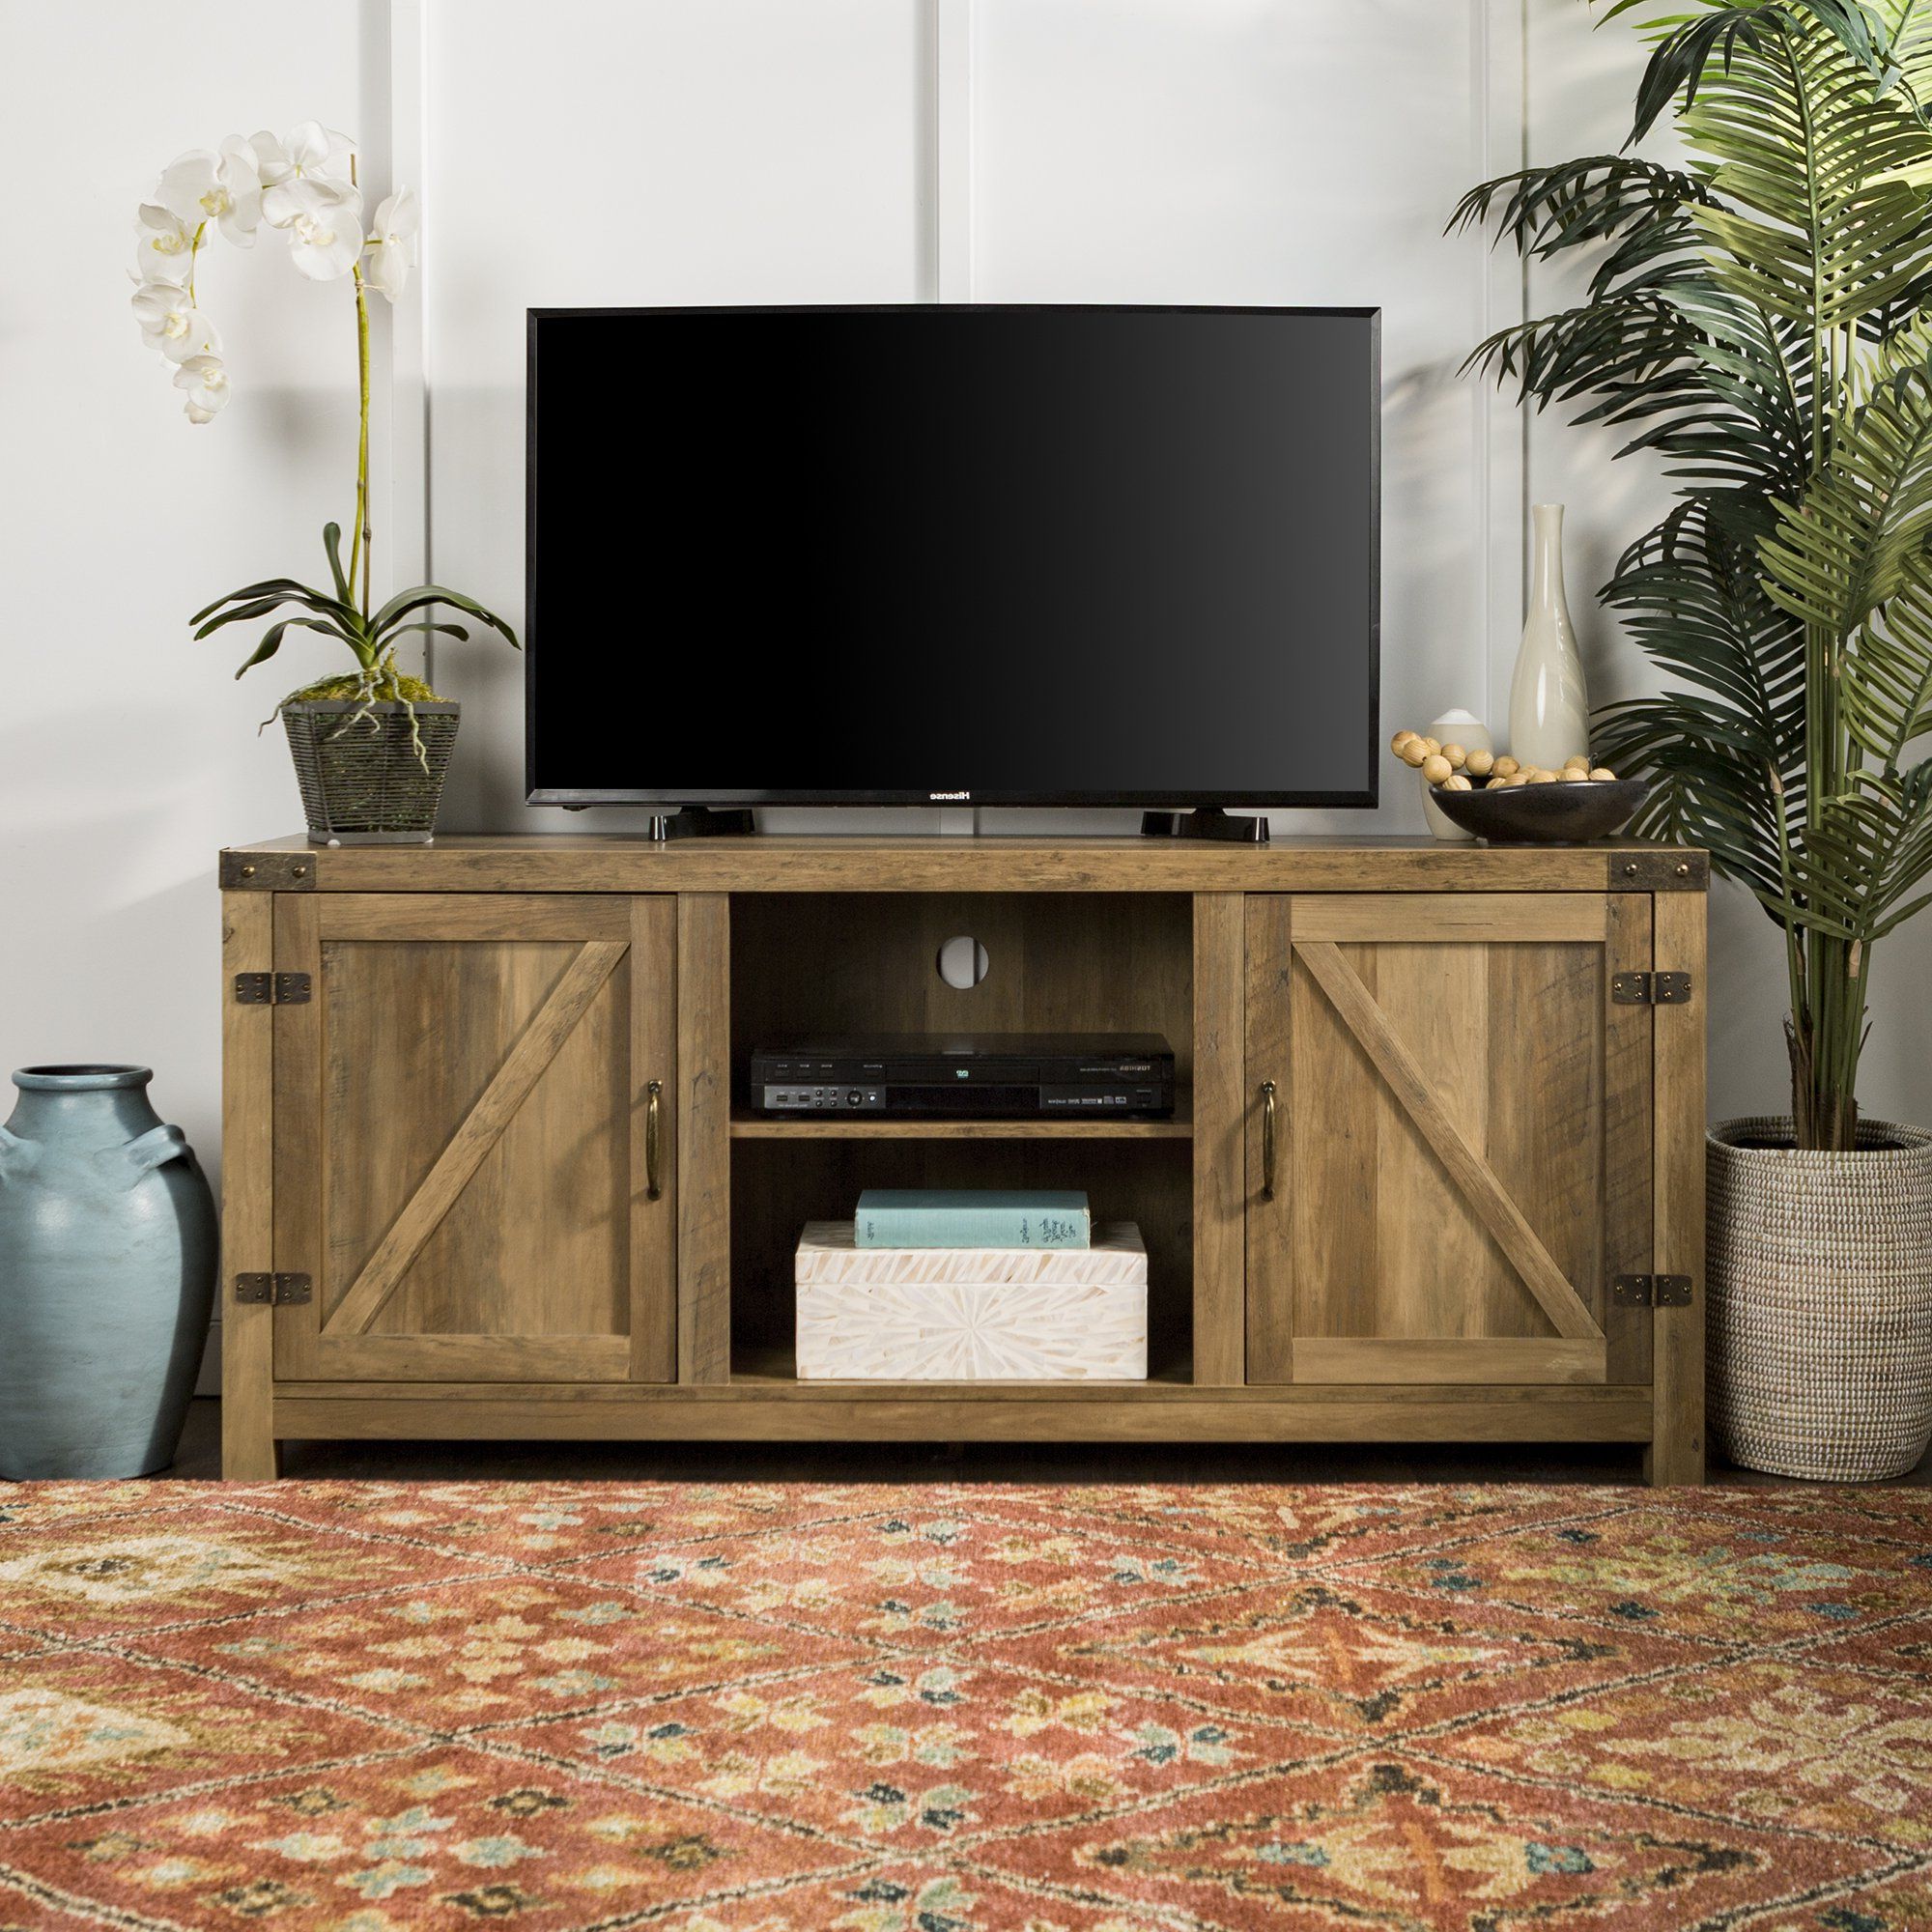 Recent Tv Stands With Sliding Barn Door Console In Rustic Oak Pertaining To Home Accent Furnishings New 58 Inch Barn Door Television (View 6 of 10)